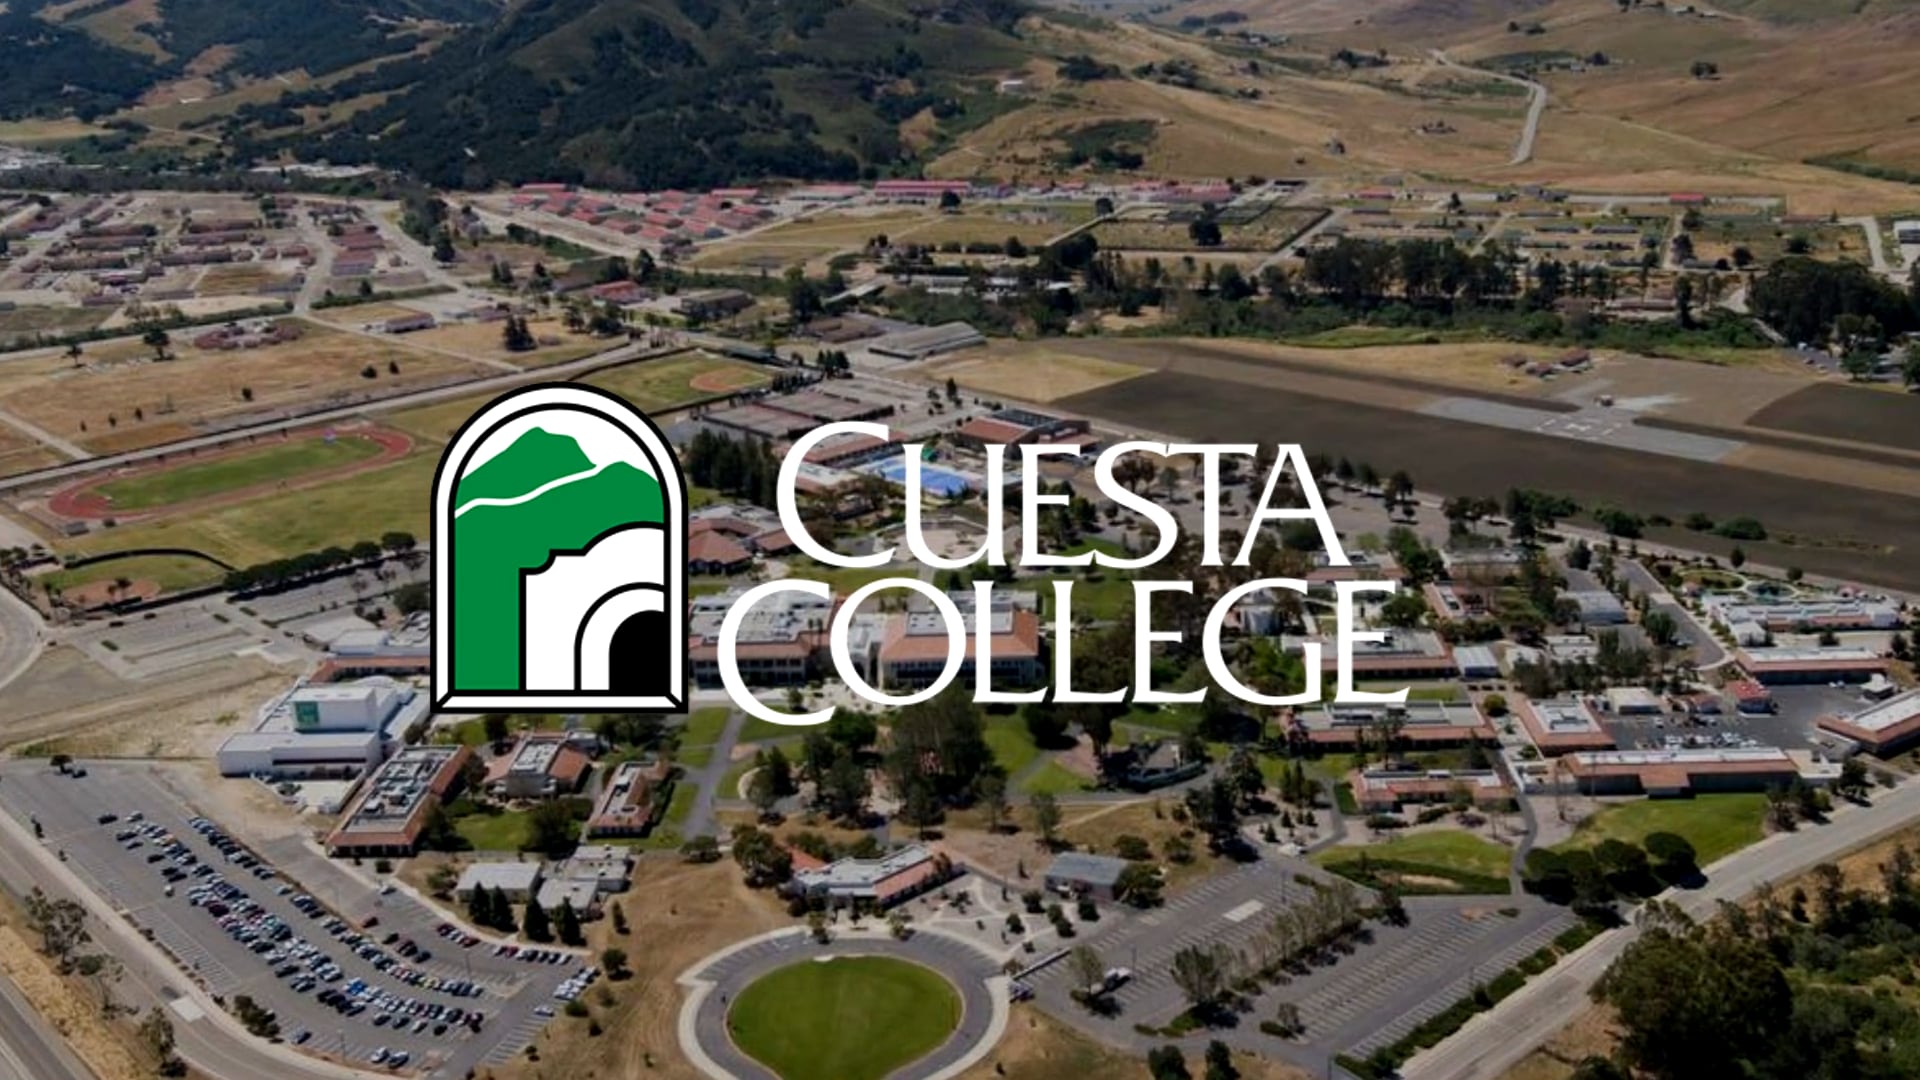 Cuesta College Online Instructor Led Courses on Vimeo